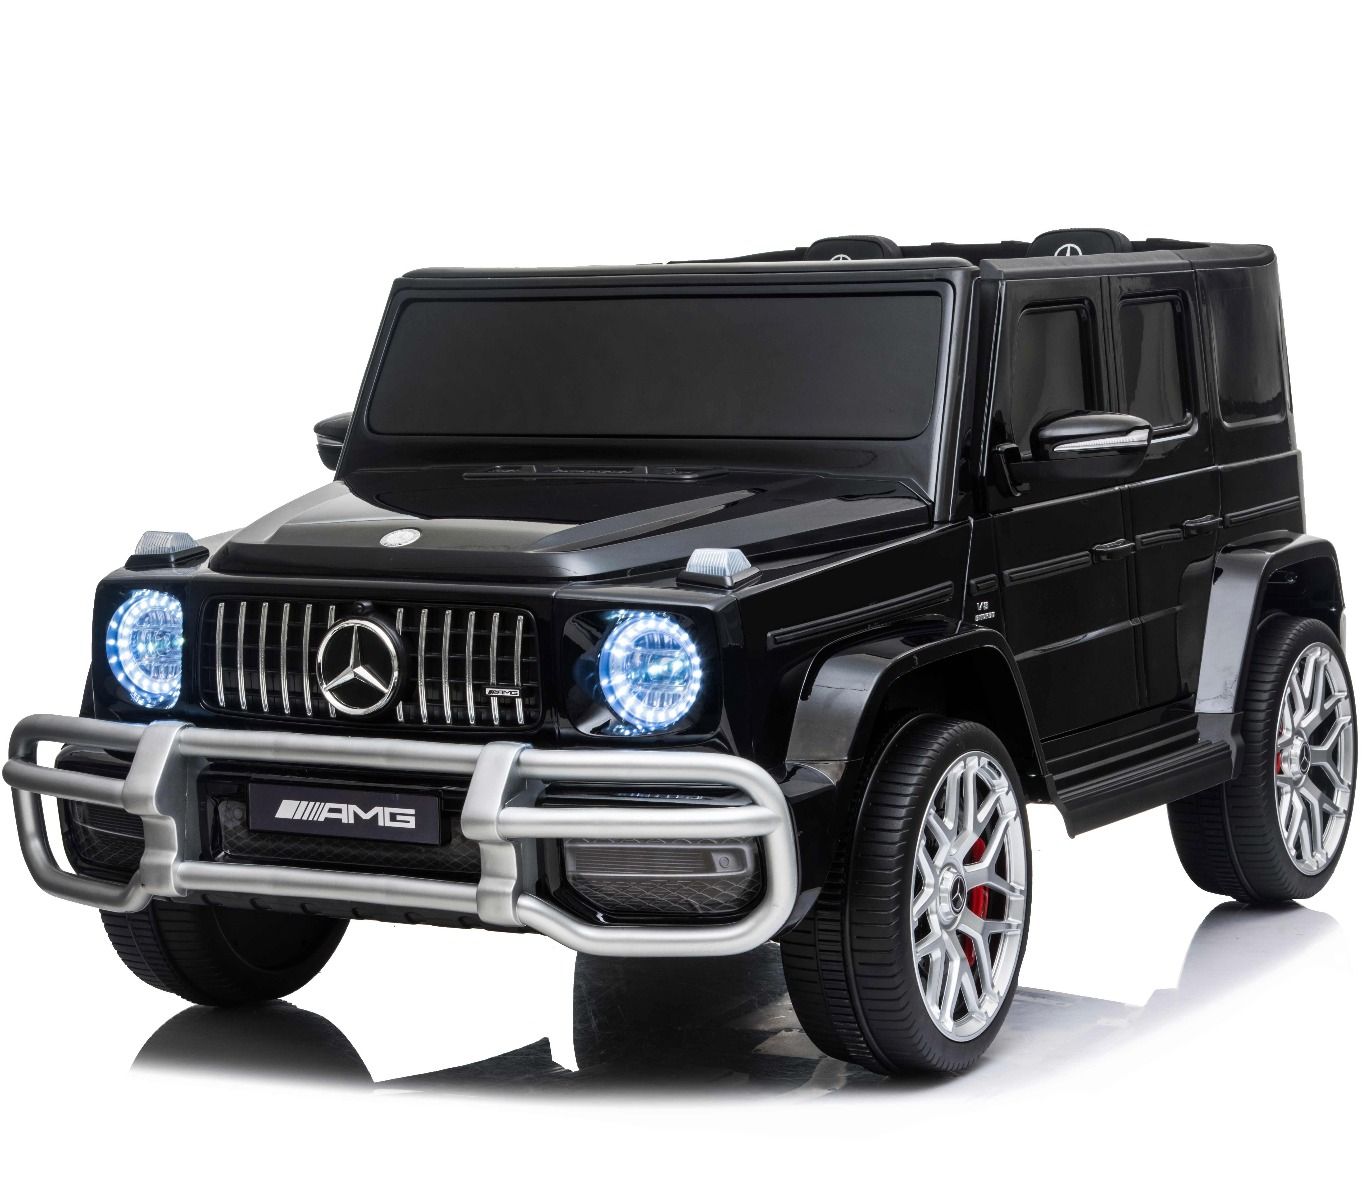 "Matte black Mercedes G-Wagon AMG G63 electric ride on 2 seater jeep with 4-wheel drive capabilities on a white background for kids."